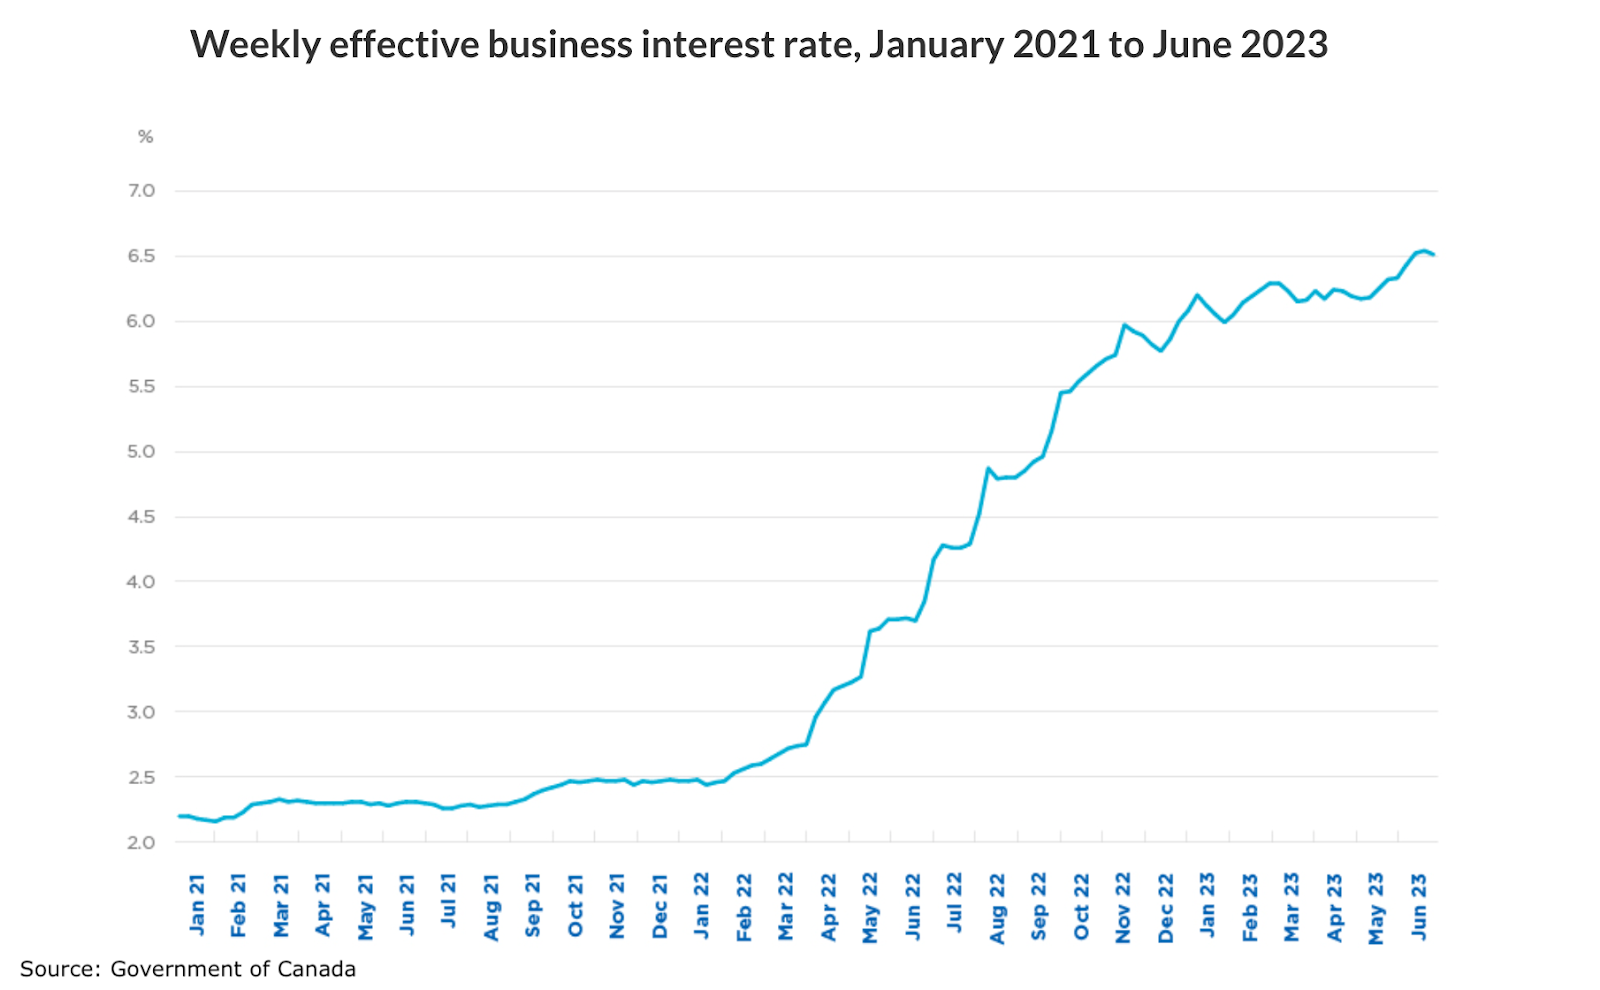 Chart of business interest rates in Canada over time.